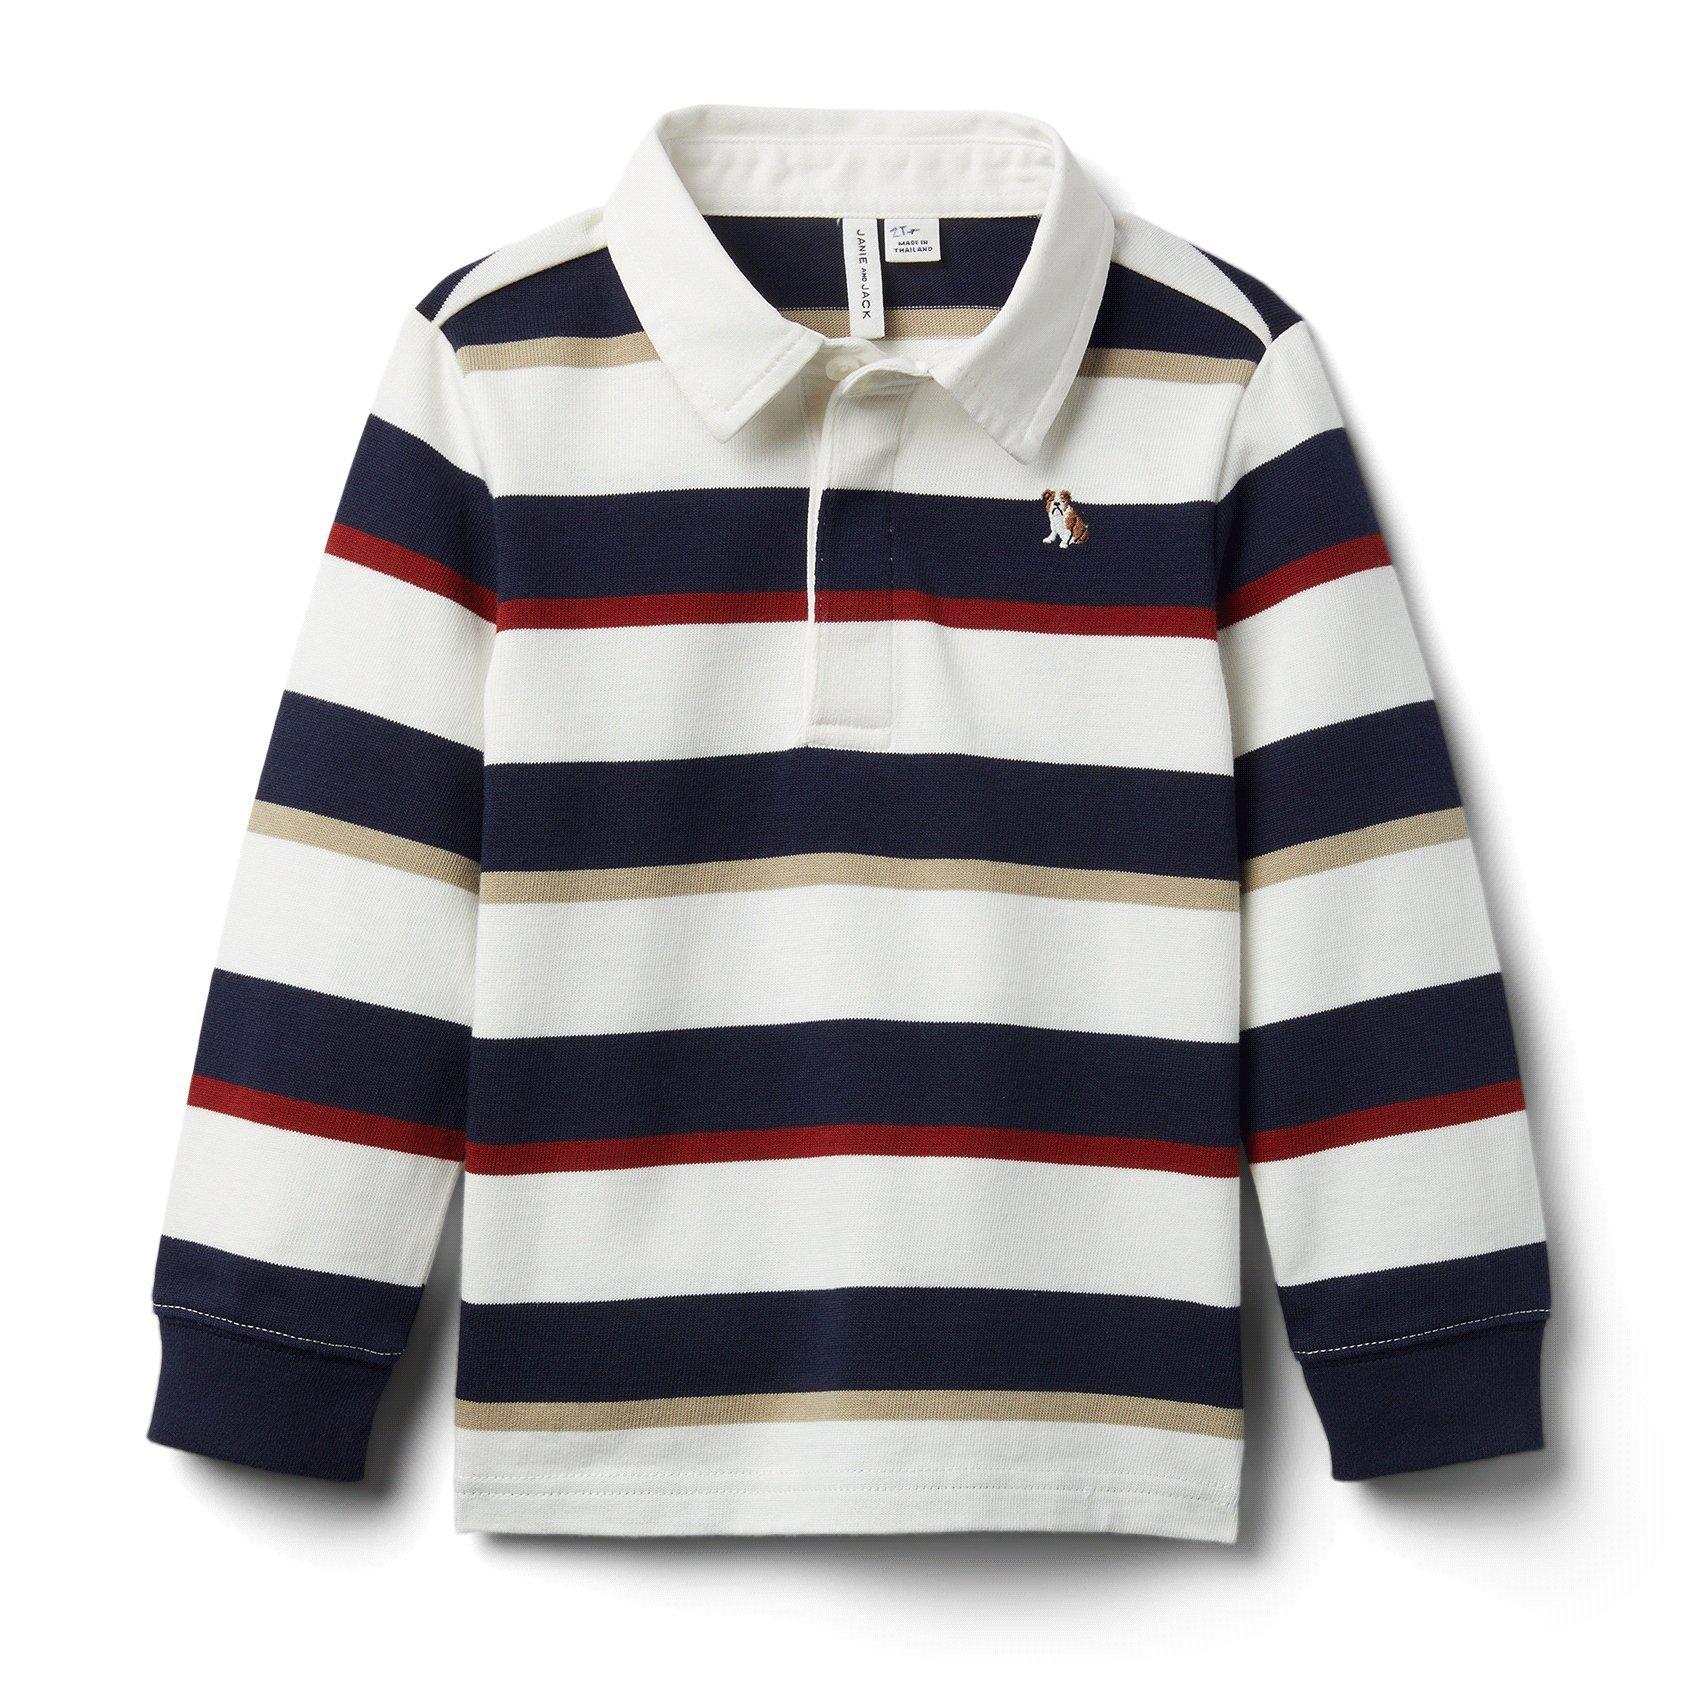 Boy Connor Navy Stripe Striped Rugby Shirt by Janie and Jack